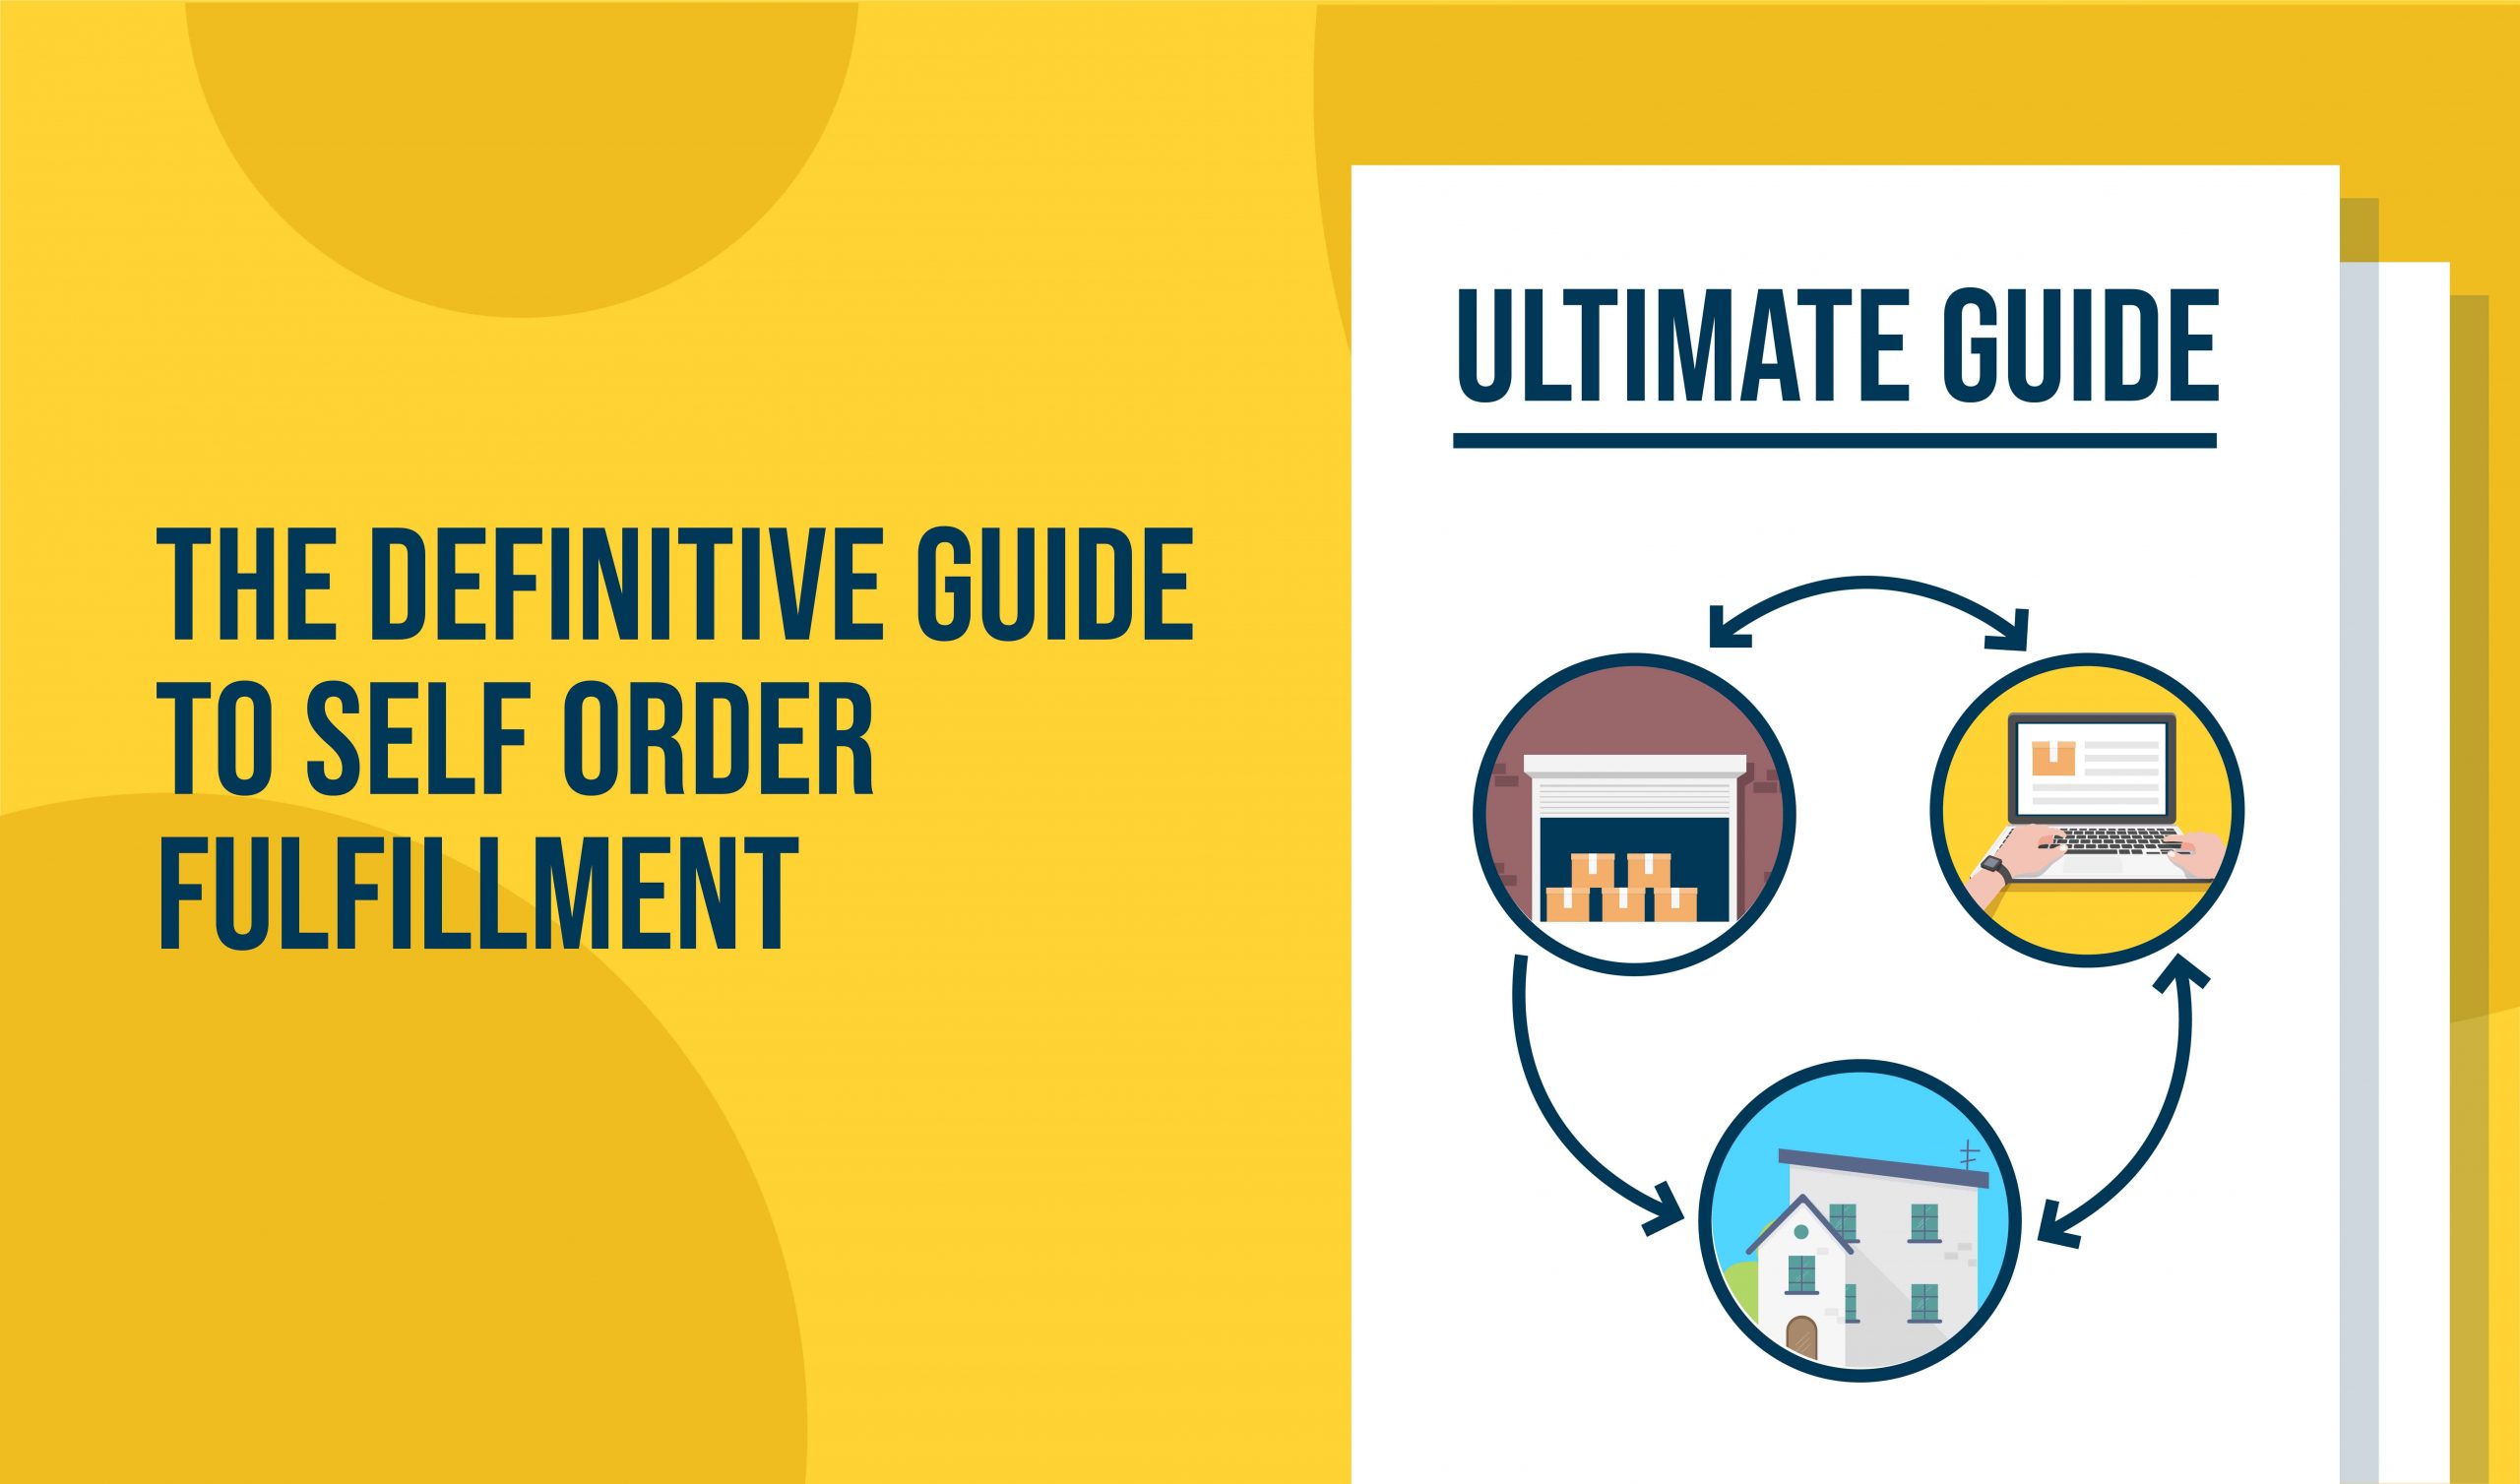 The Definitive Guide to Self Order Fulfillment